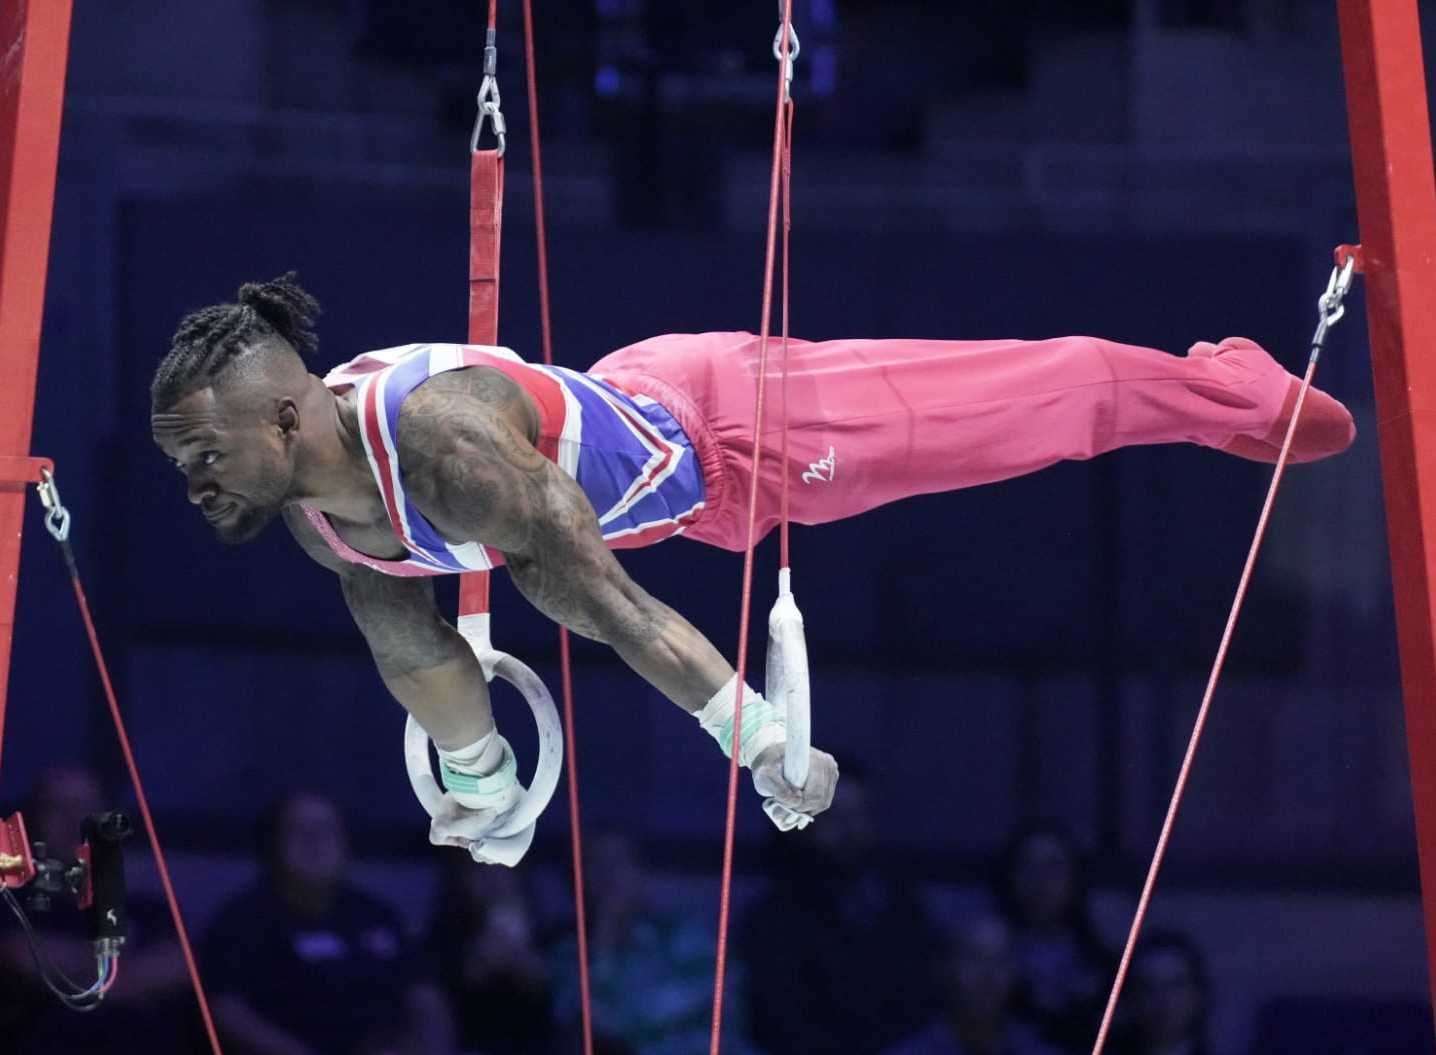 Maidstone's Courtney Tulloch is fired up for individual glory after team success at the World Gymnastics Championships. Picture: Simone Ferraro